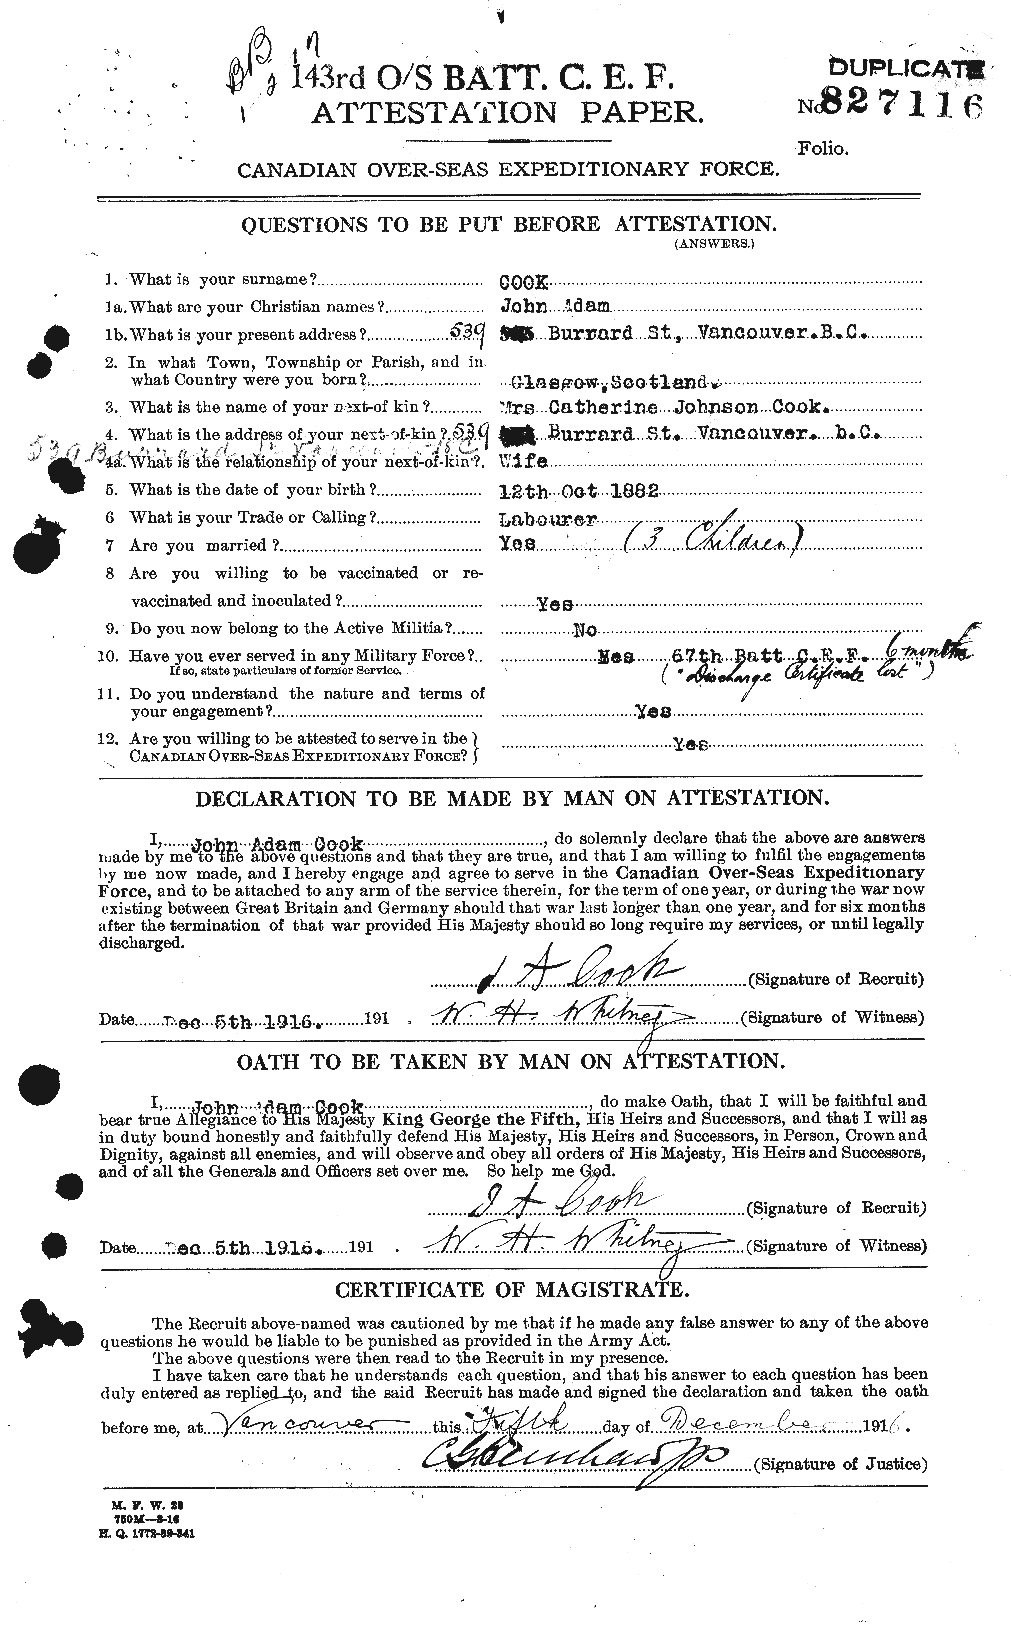 Personnel Records of the First World War - CEF 075669a